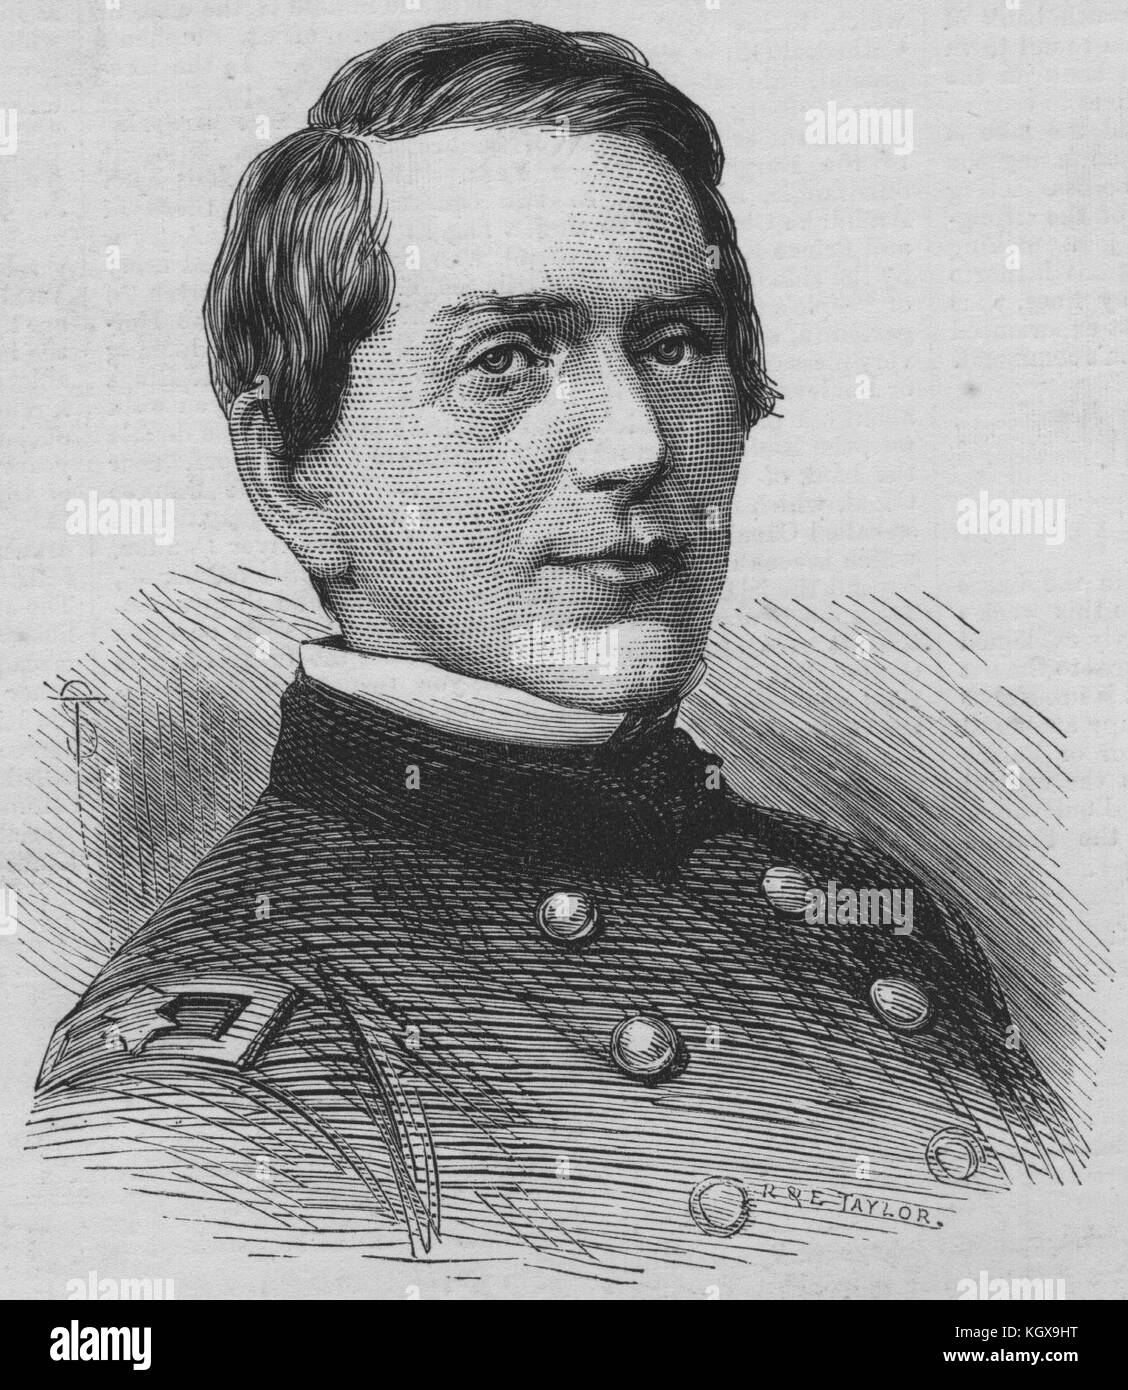 Brigadegeneral E.R.S. Canby, durch die modoc Indianer ermordet. USA 1873. Die Illustrated London News Stockfoto